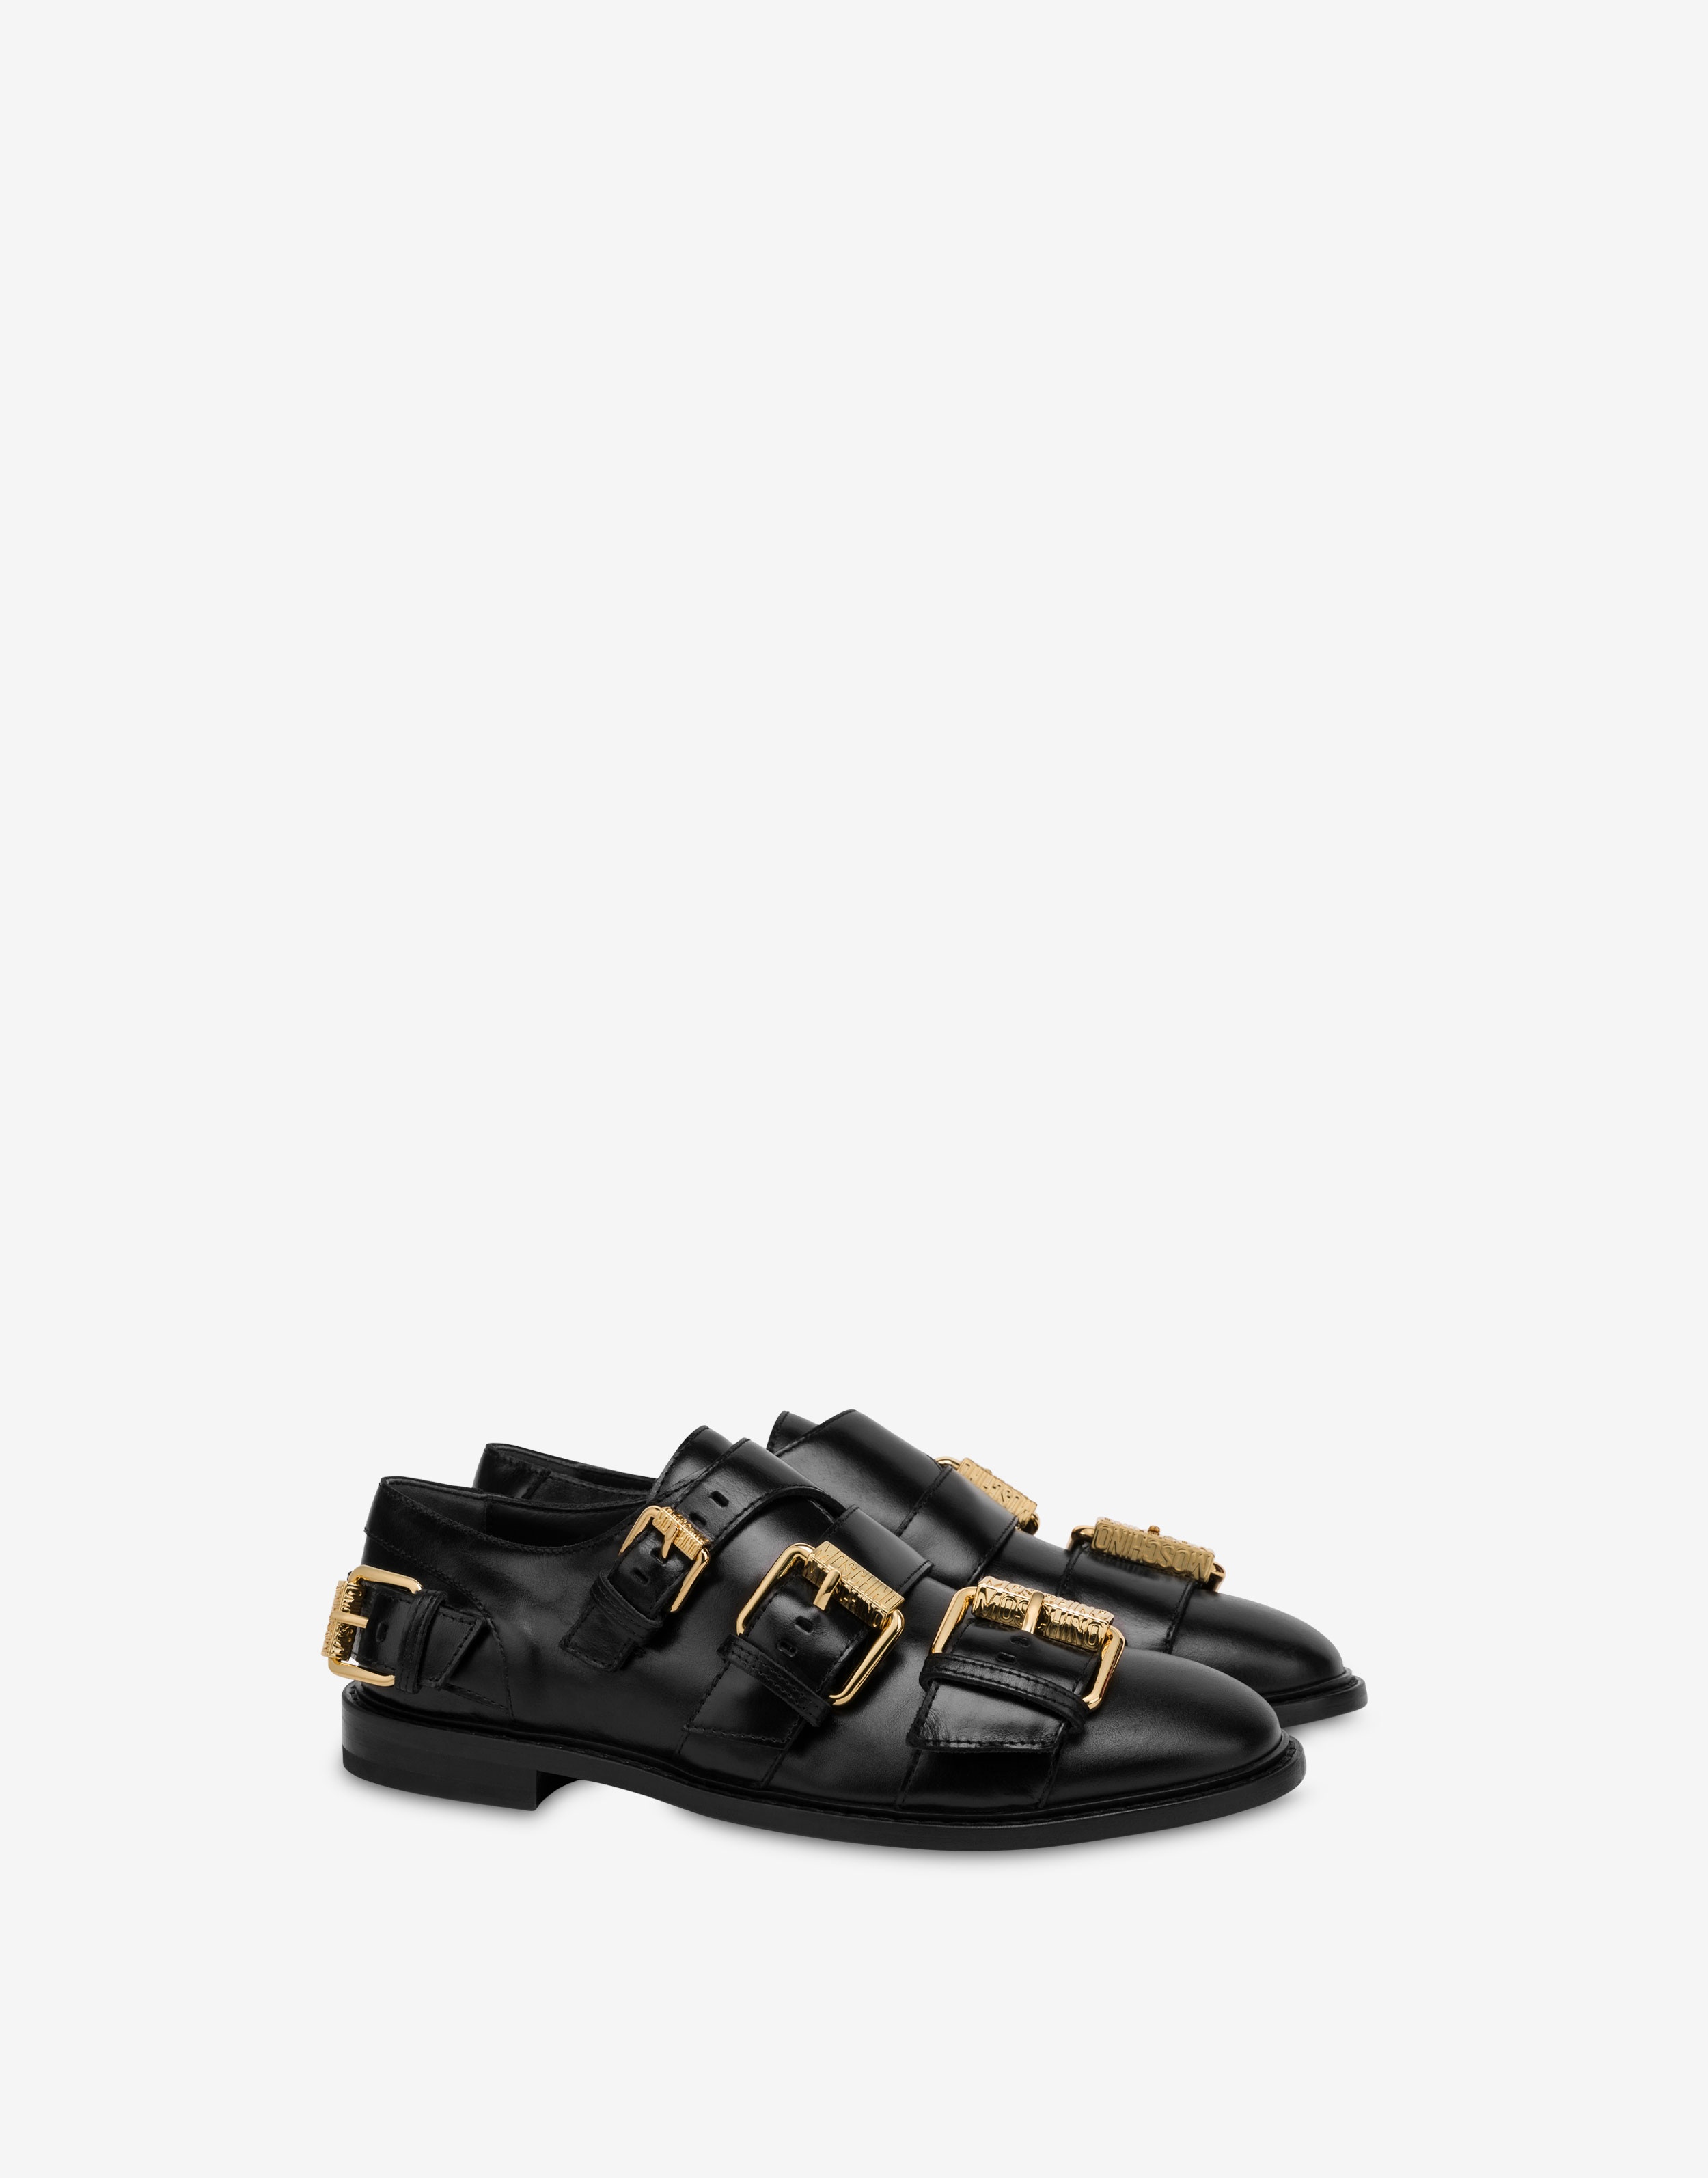 MULTI BUCKLES SHINY CALFSKIN LOAFERS - 1